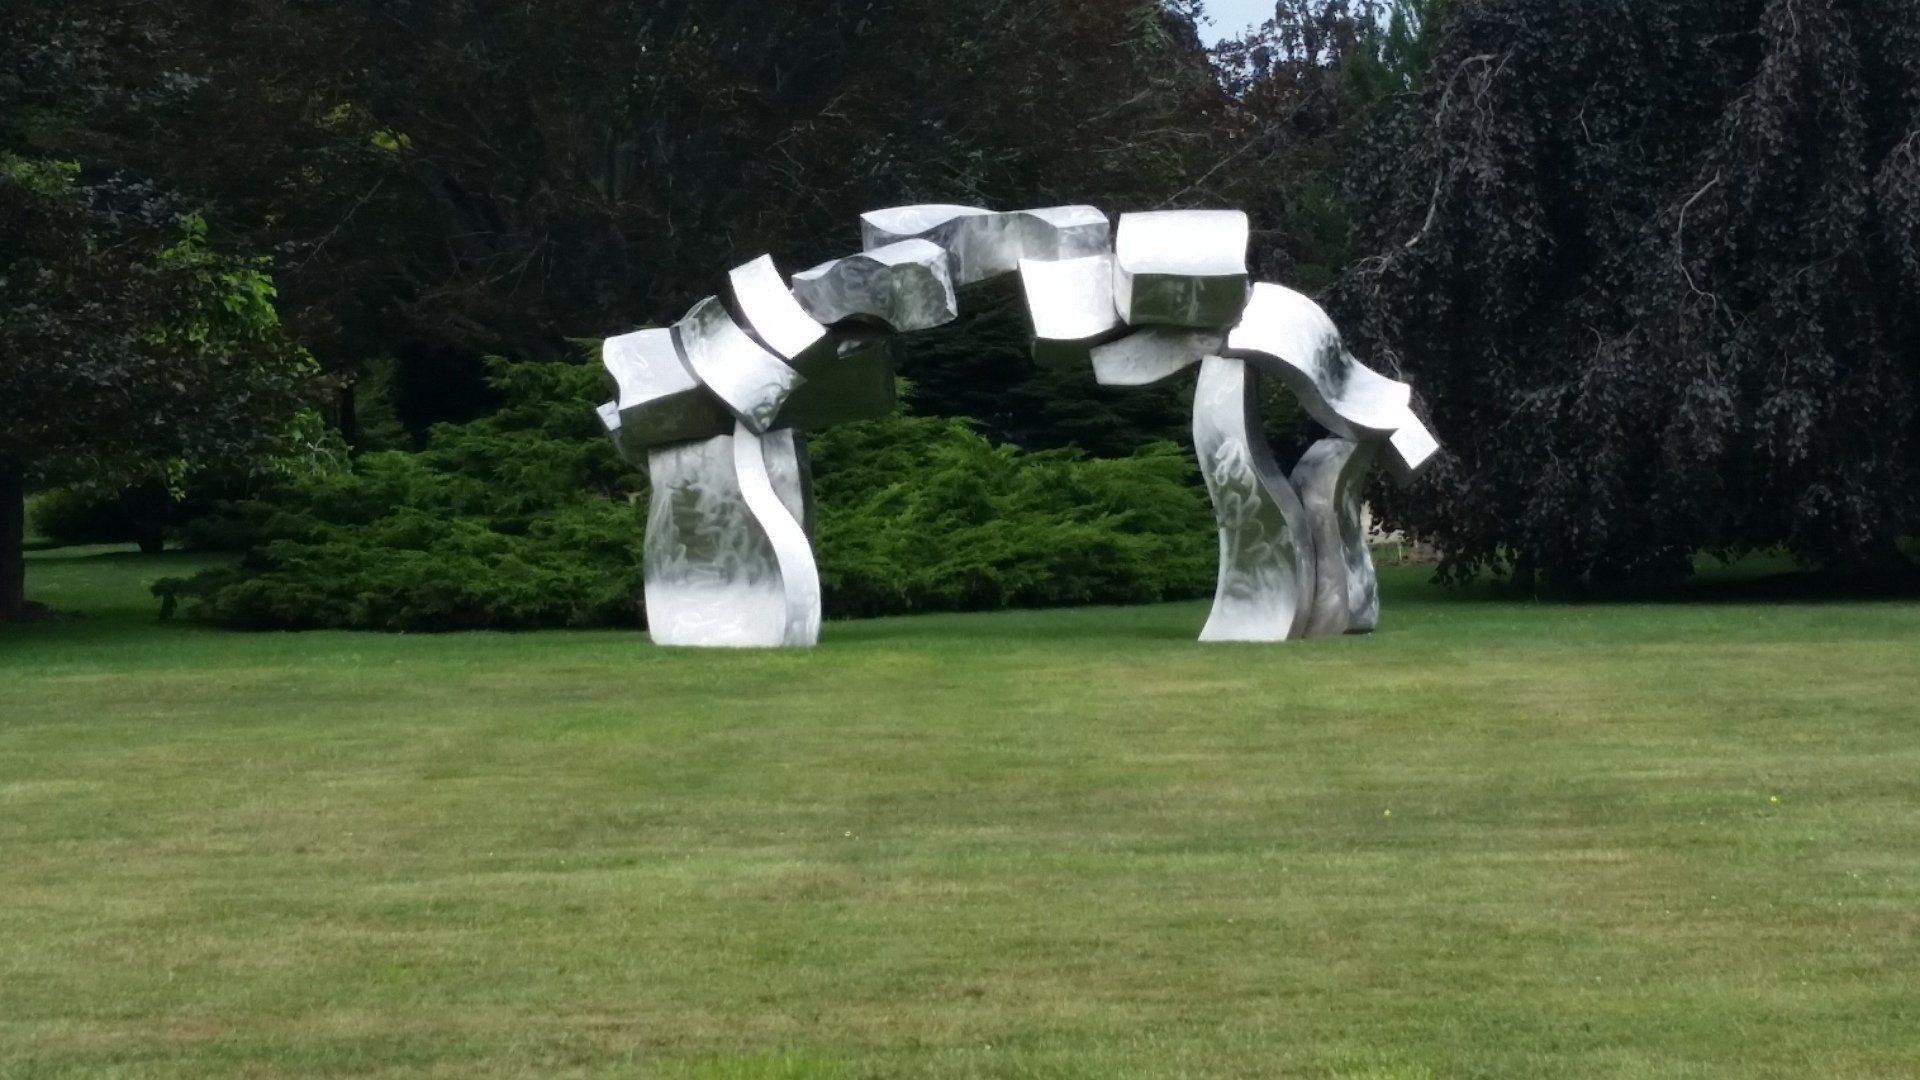 Large outdoor sculpture in a field.